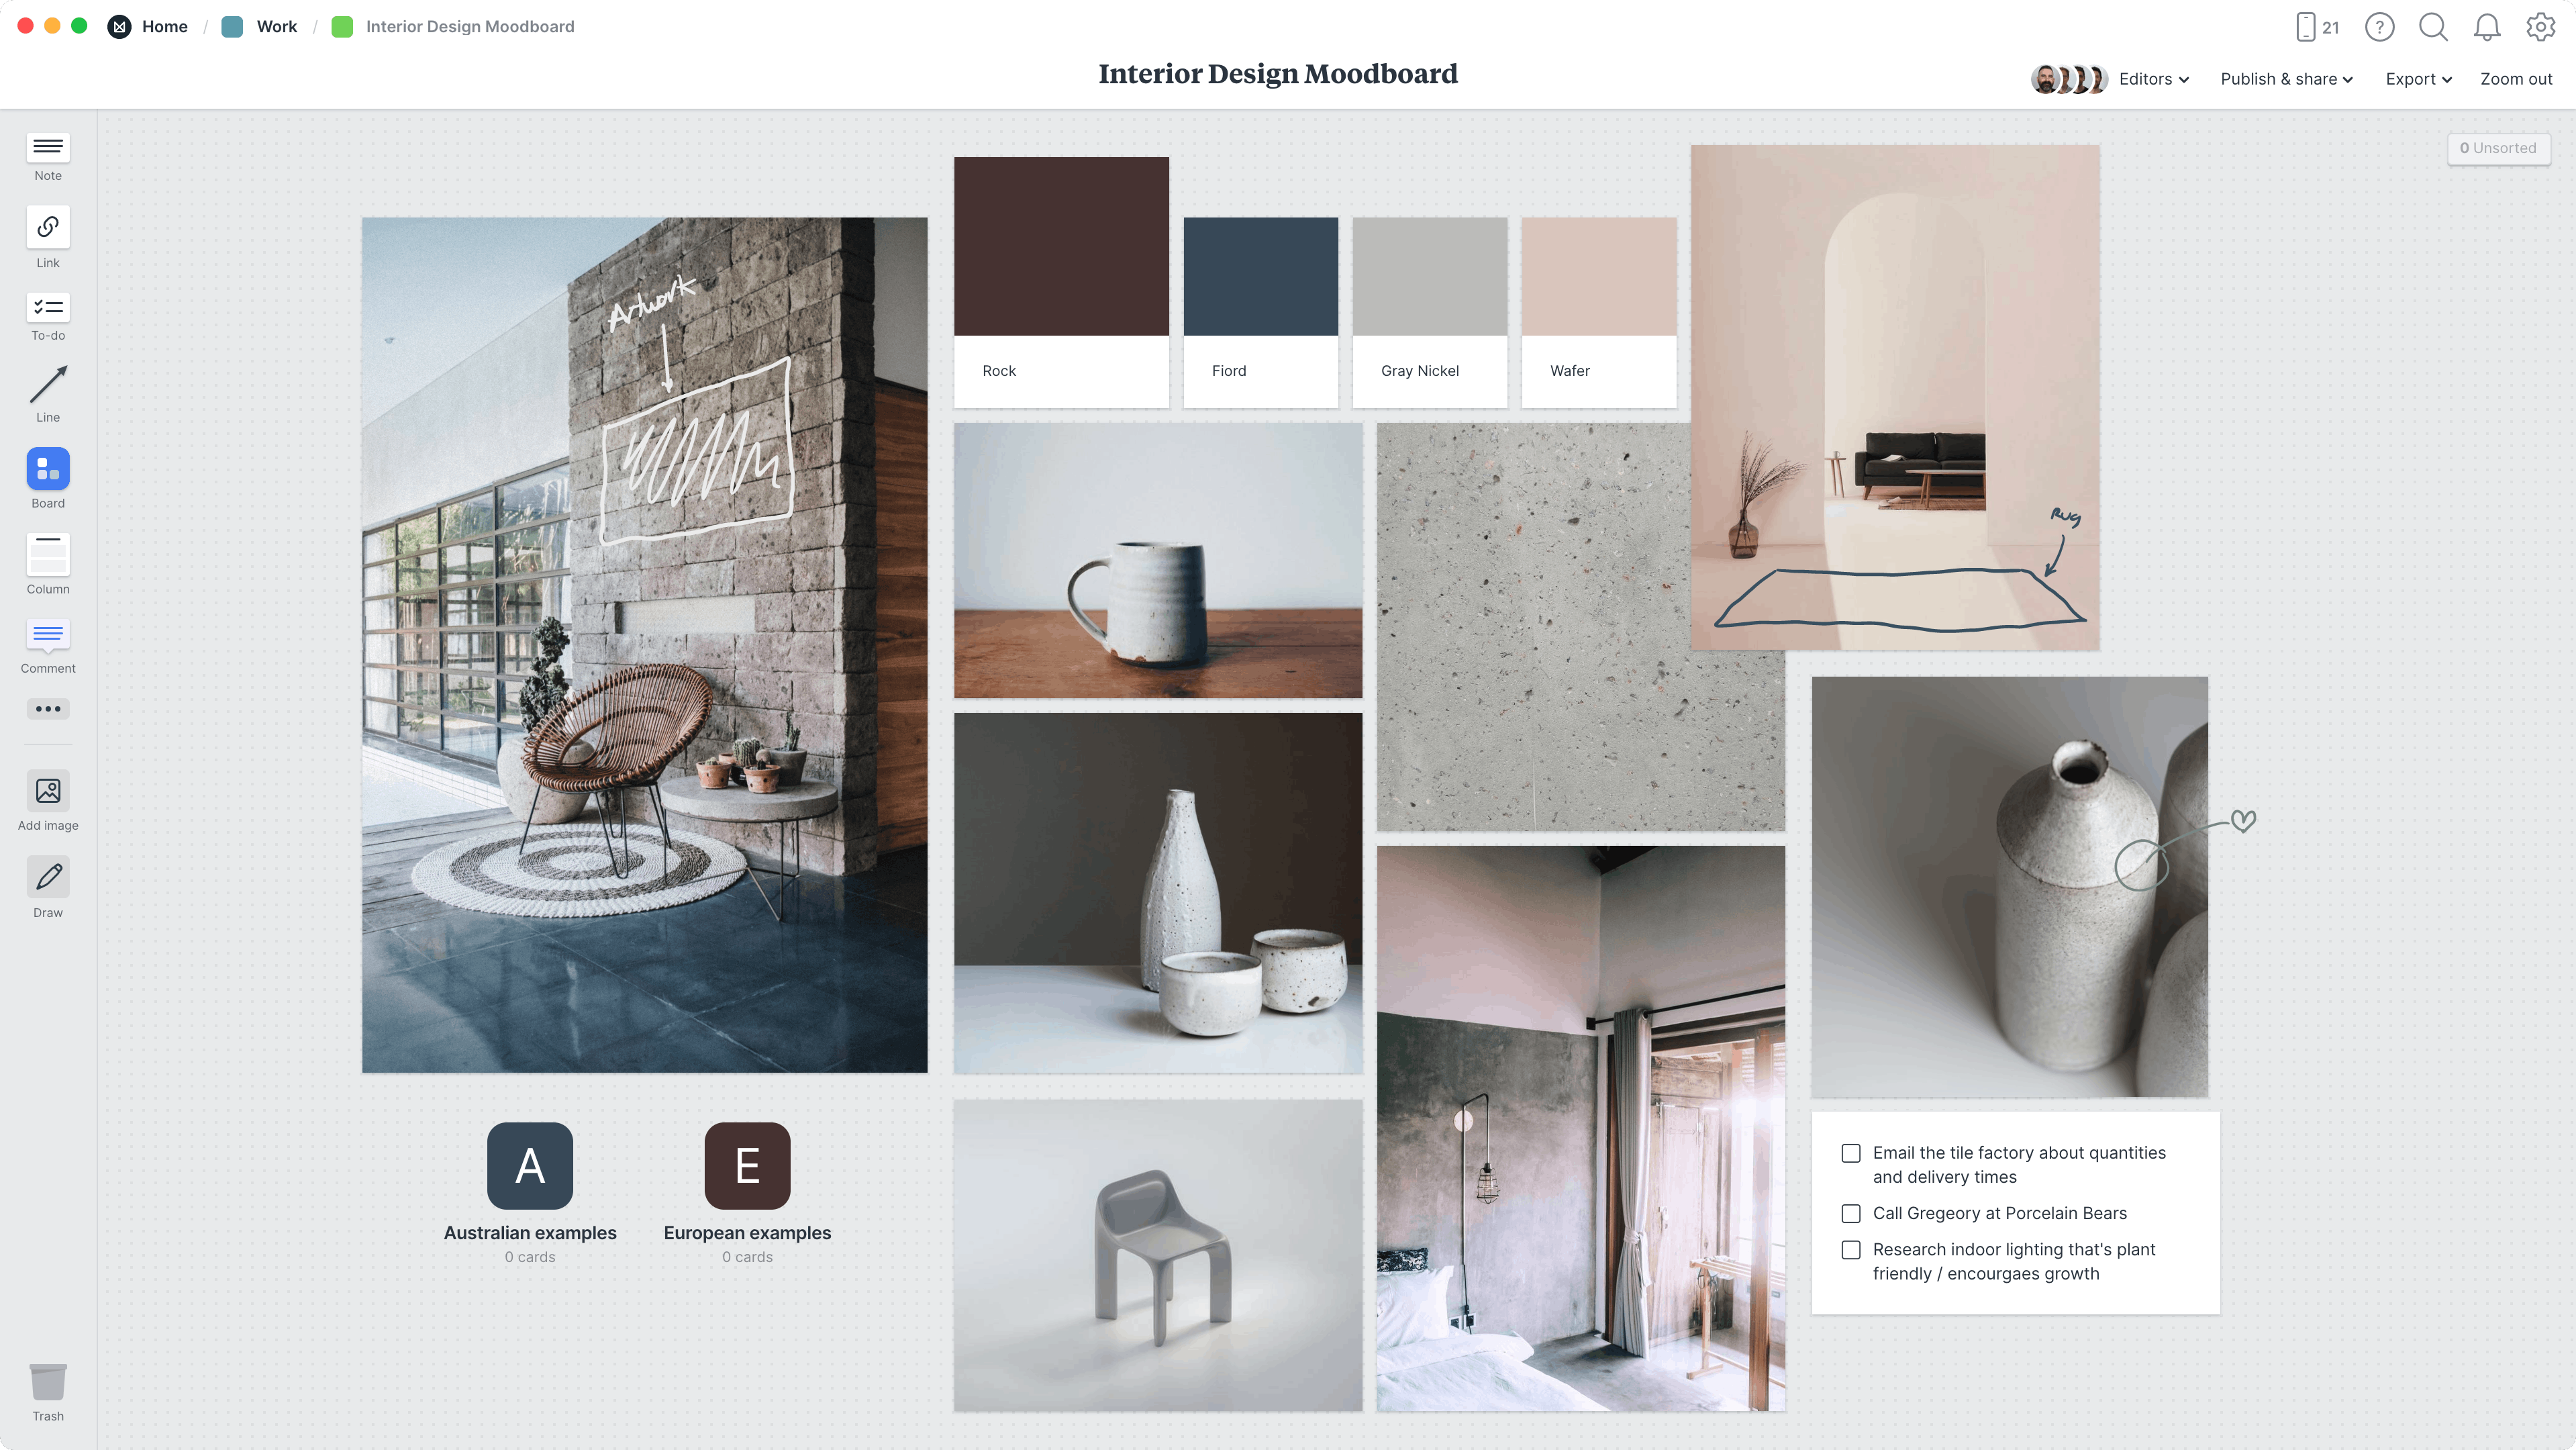 Interior Design Moodboard Template, within the Milanote app